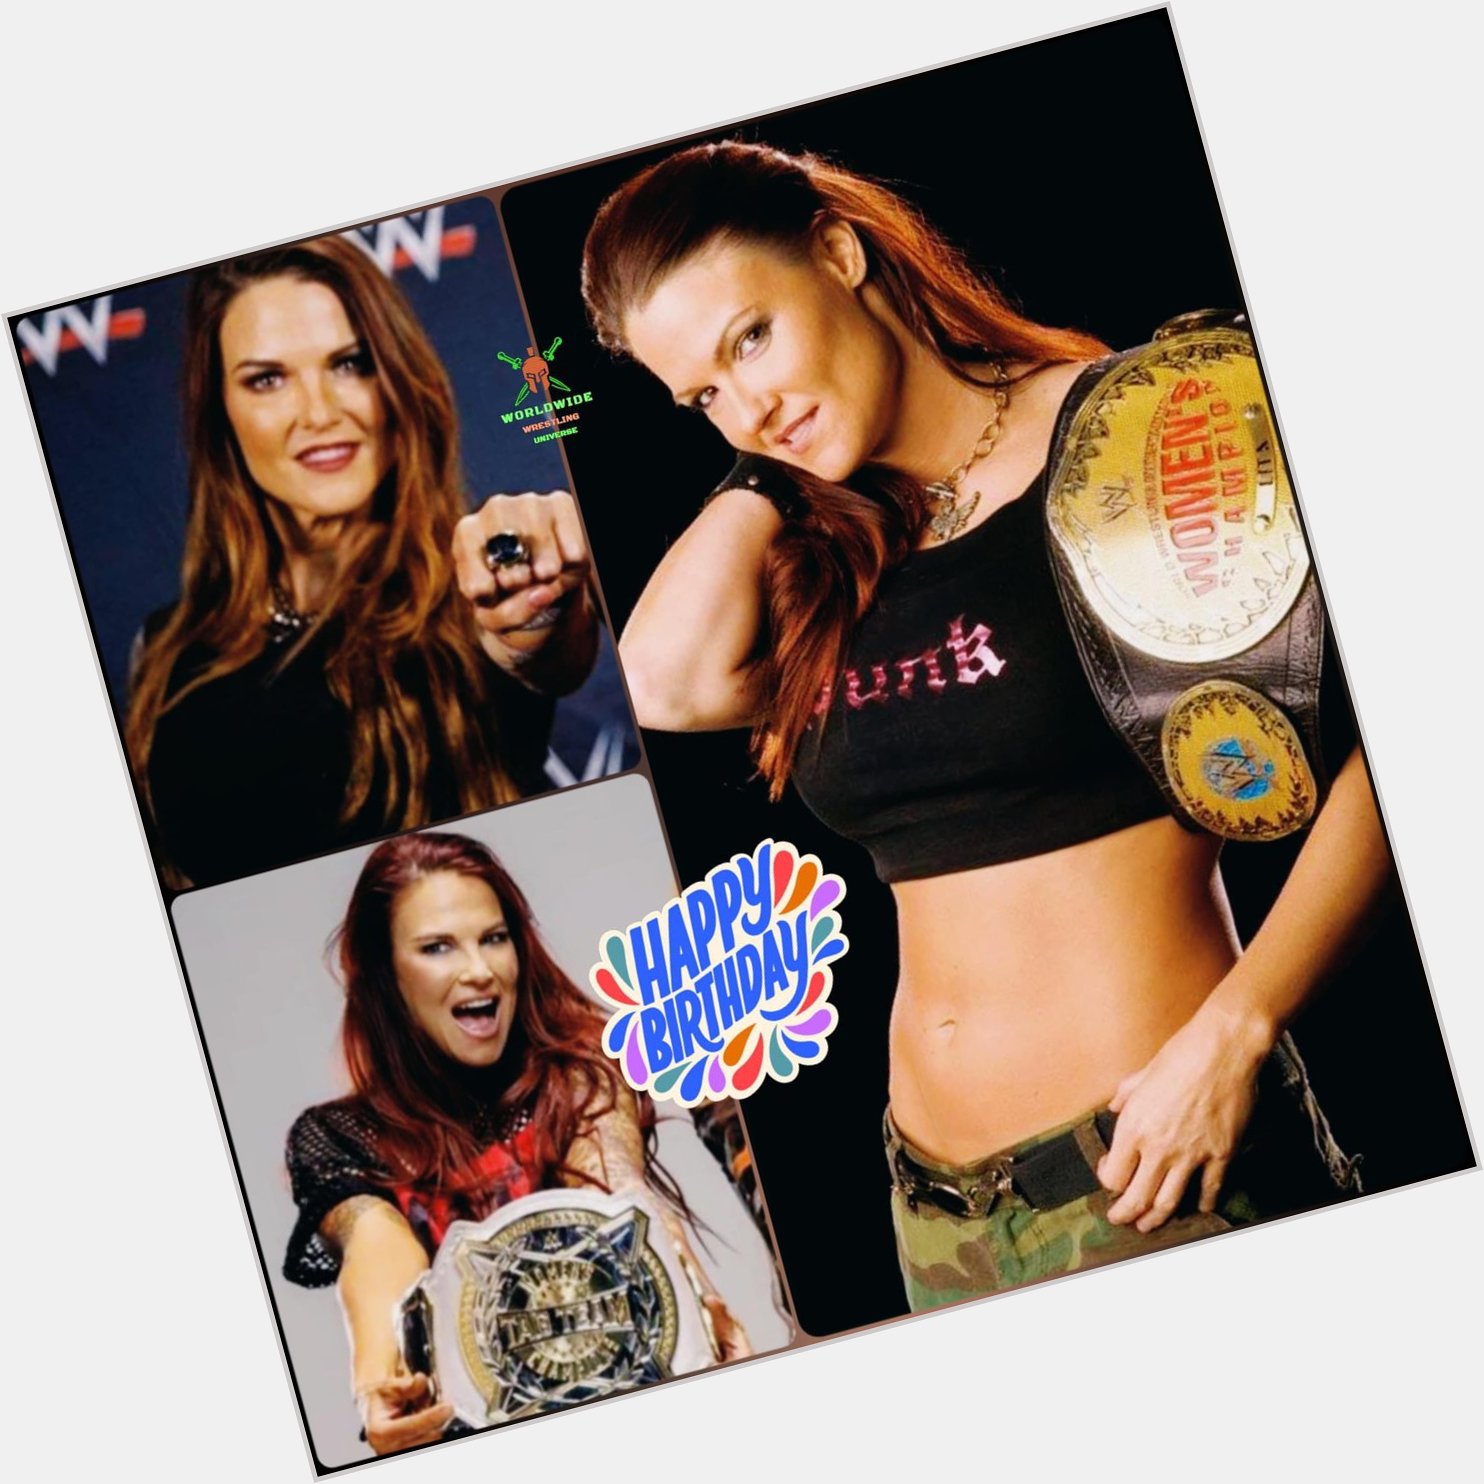 Happy Birthday to Lita      It was great to see her as a Champion one last time    